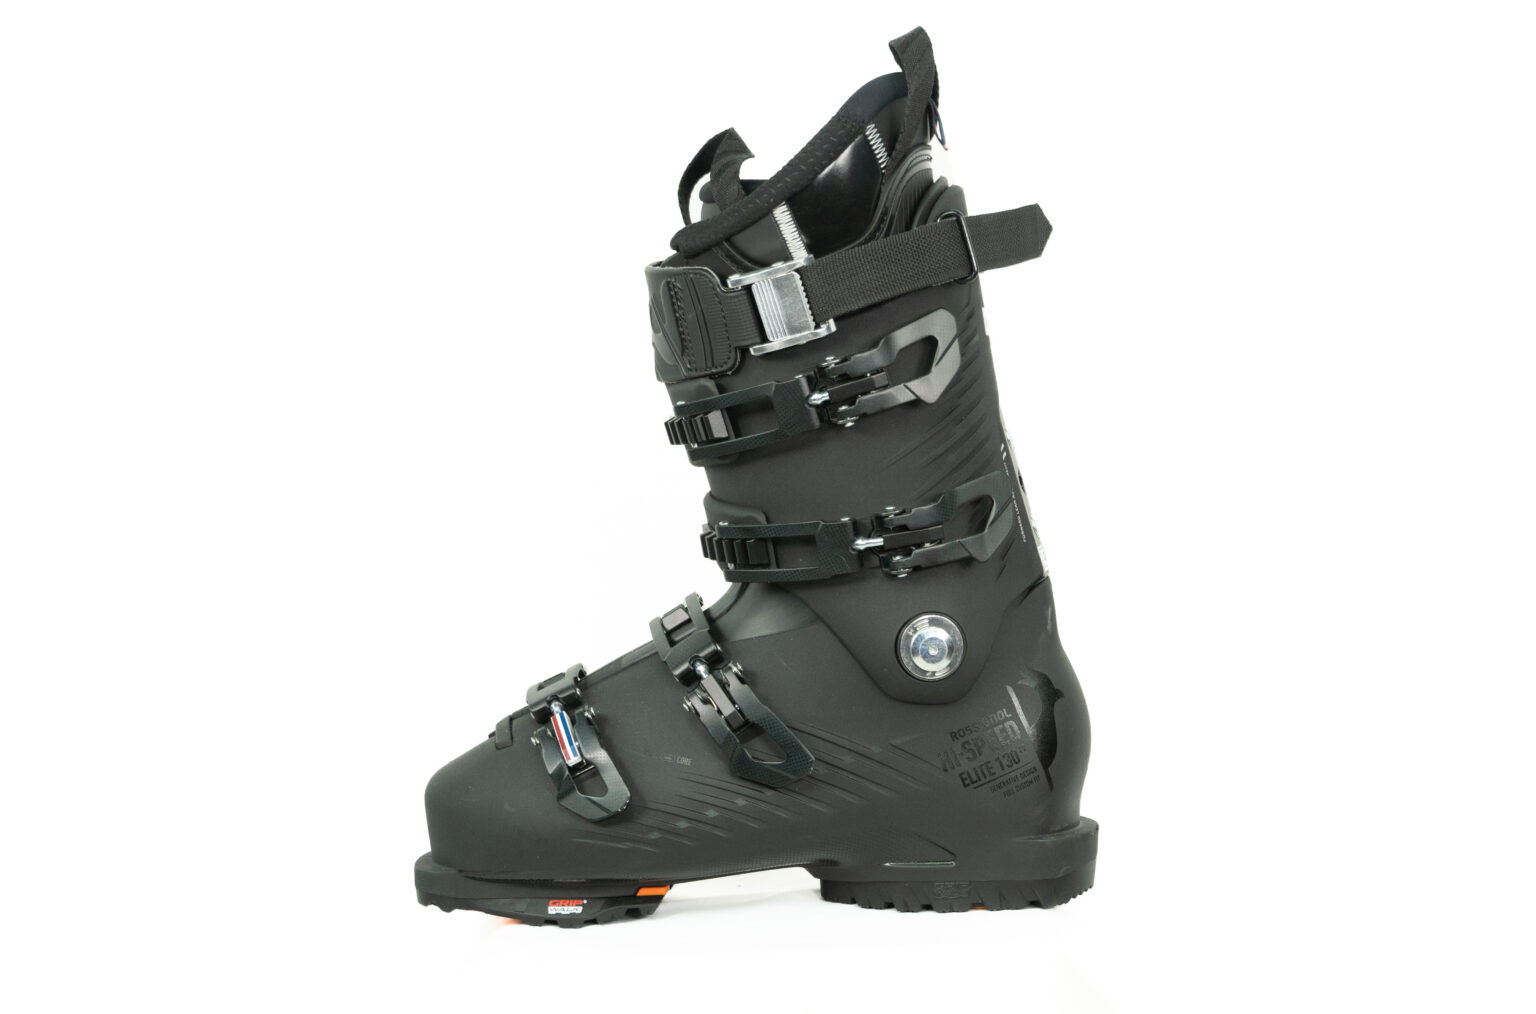 Ski Boots | BLISTER Outdoor Media & Gear Reviews